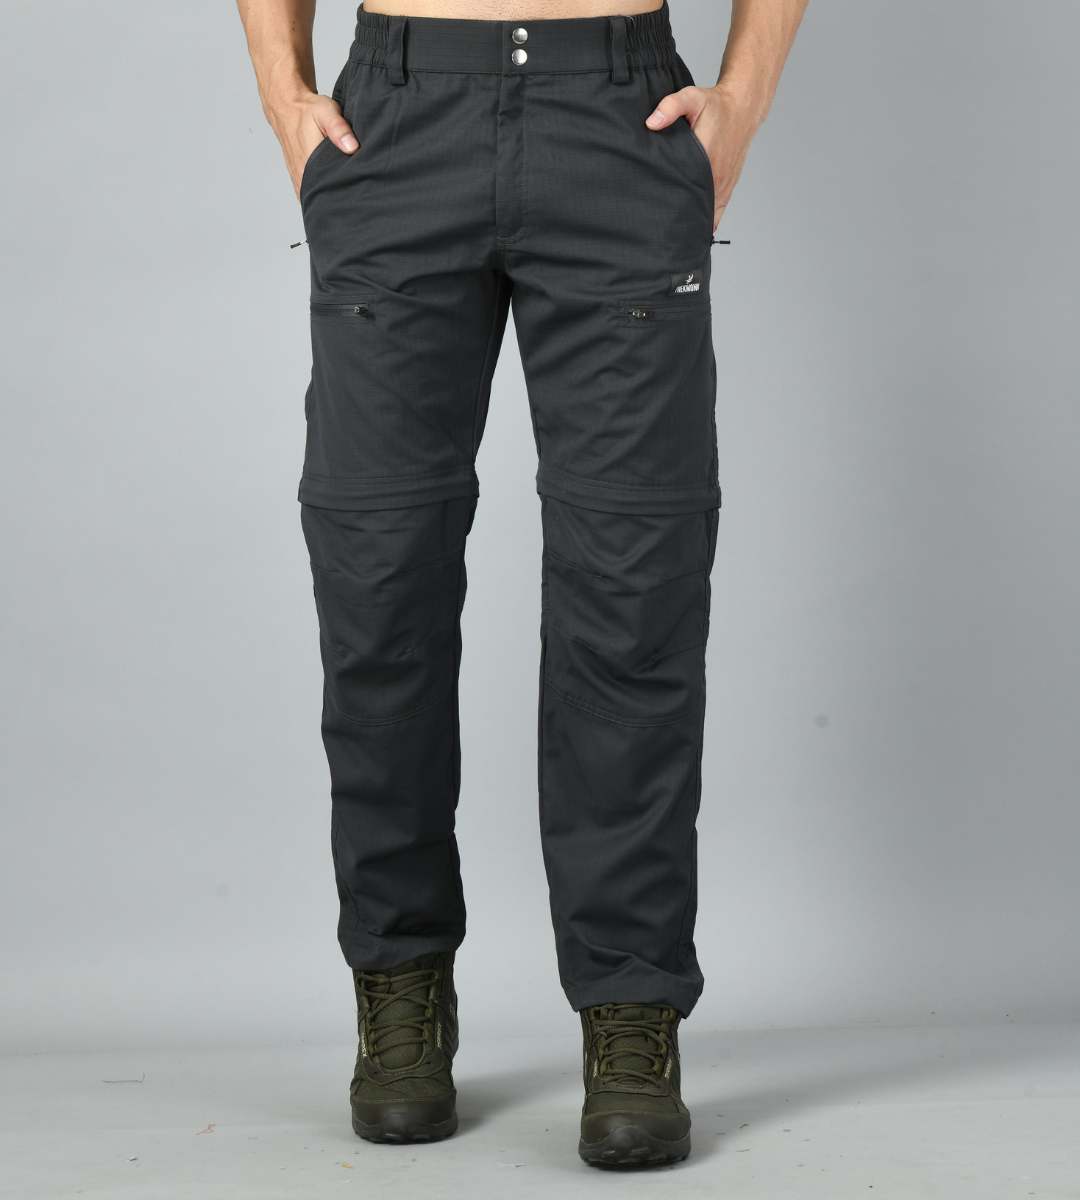 Men's DuluthFlex Dry on the Fly Convertible Relaxed Fit Cargo Pants |  Duluth Trading Company